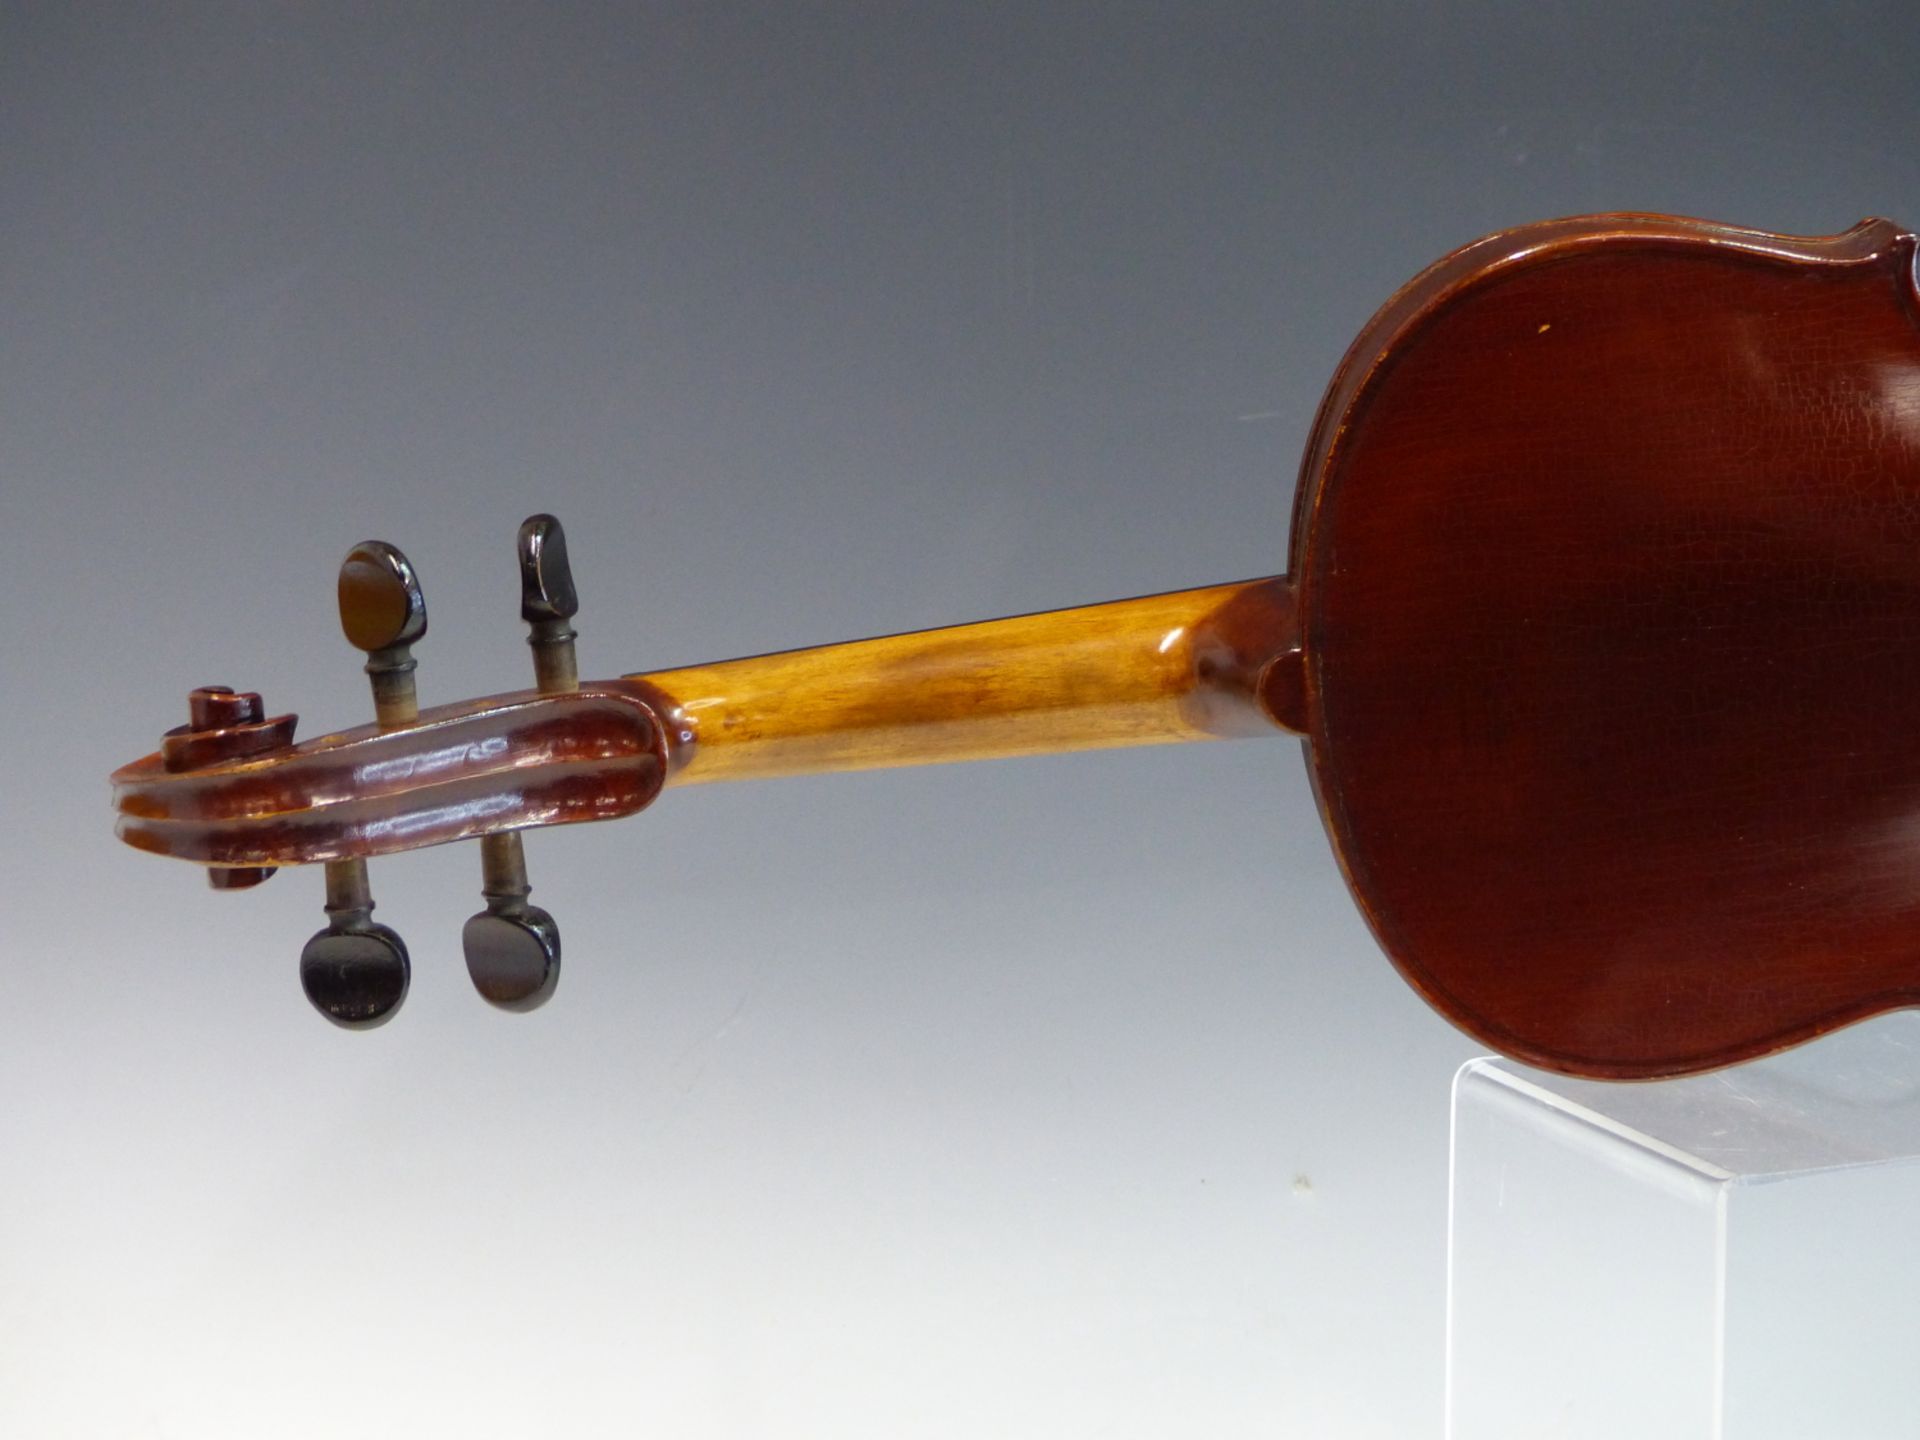 A 20TH CENTURY VIOLIN WITH LABEL " ANTONIUS STRADIUARIUS CREMONENSIS". CASED WITH A SILVER PLATE - Image 9 of 19